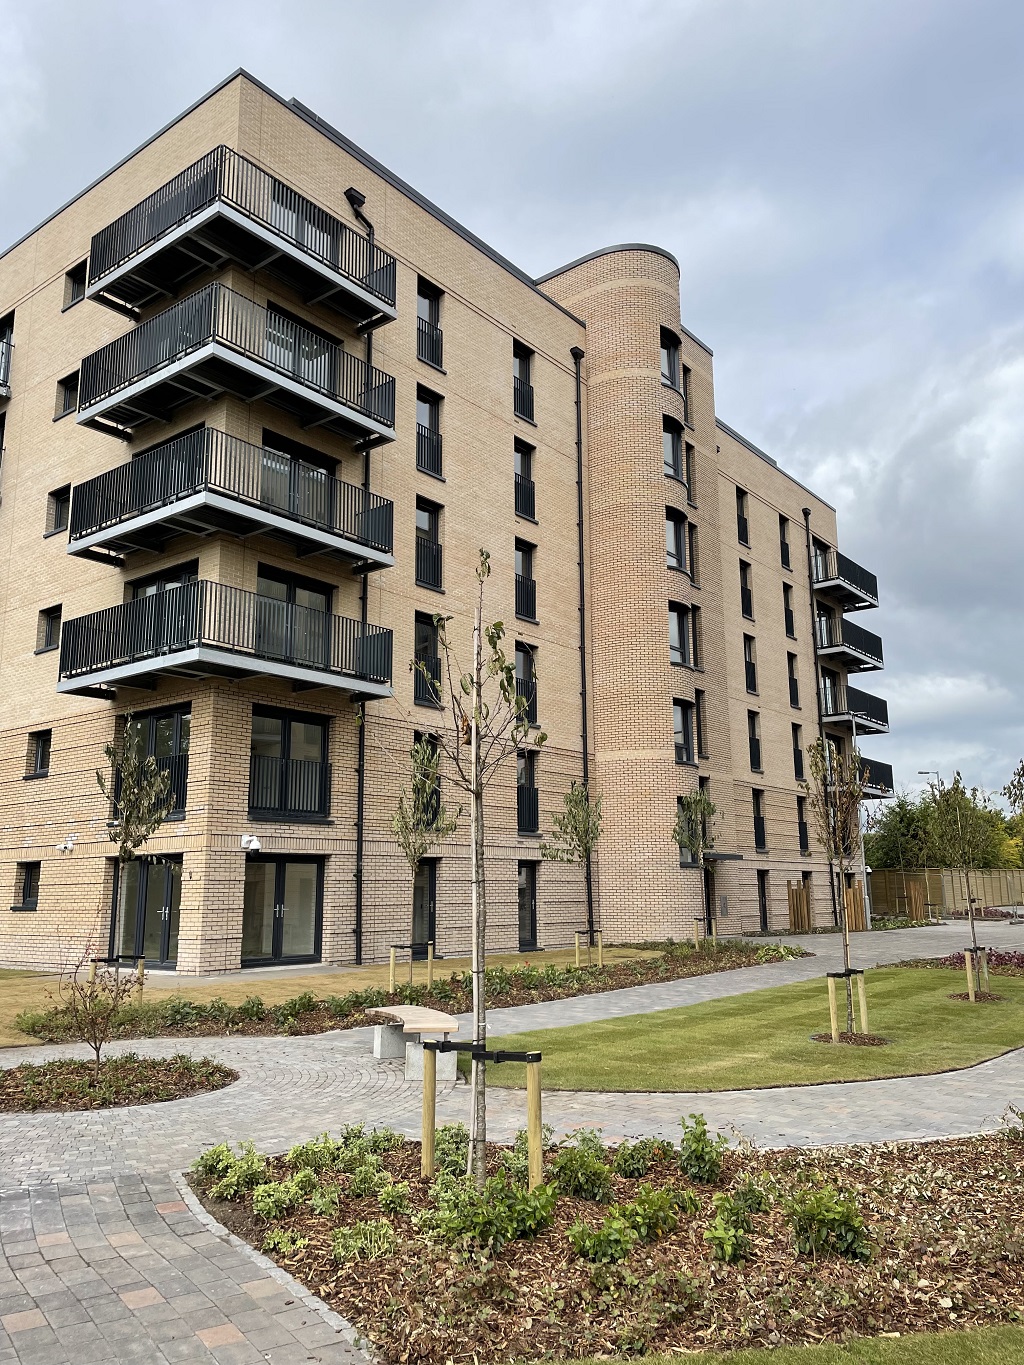 Investment fund completes £31m build-to-rent development in Glasgow